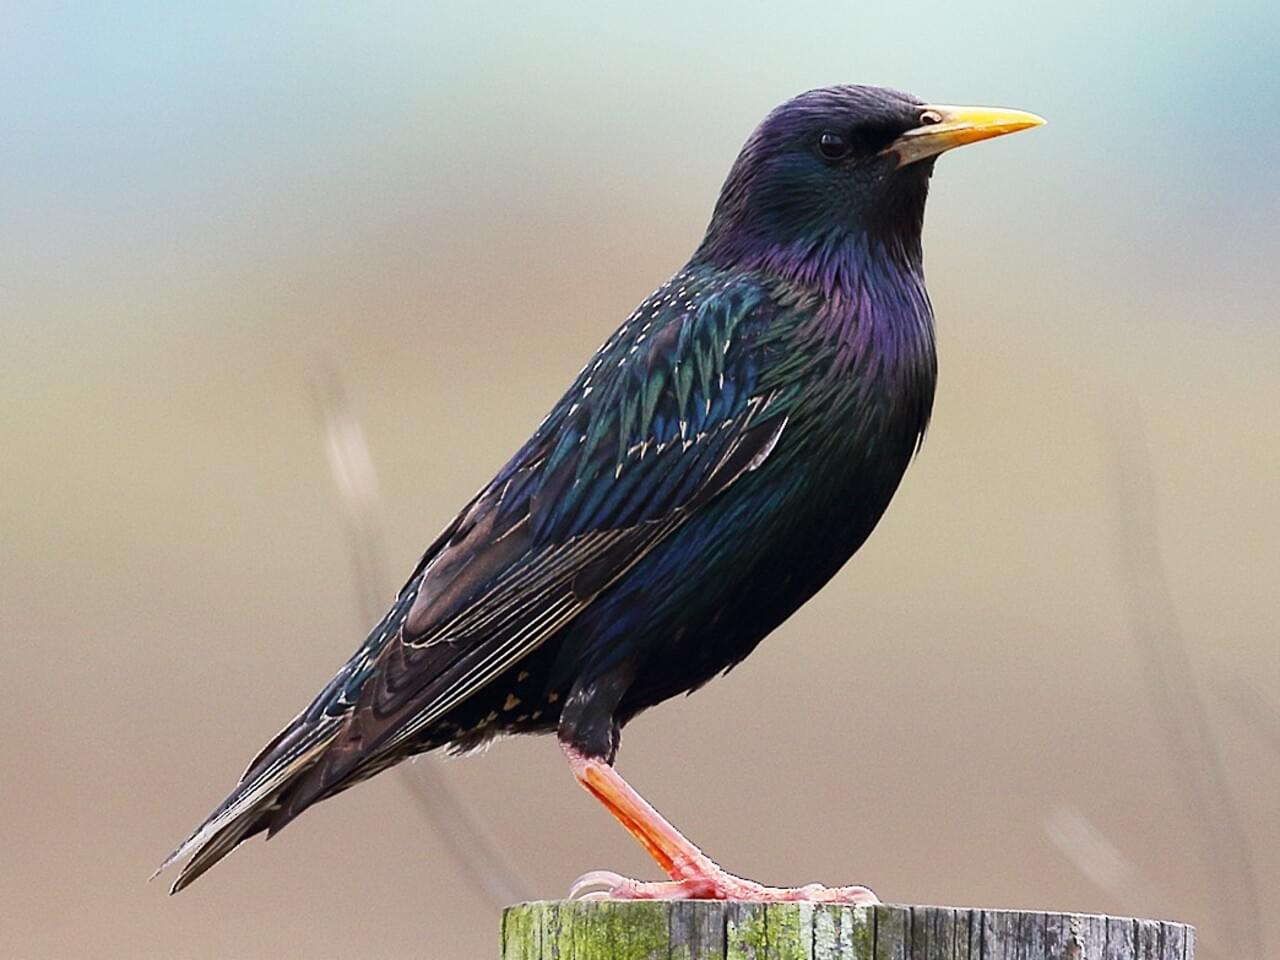 THE STARLING